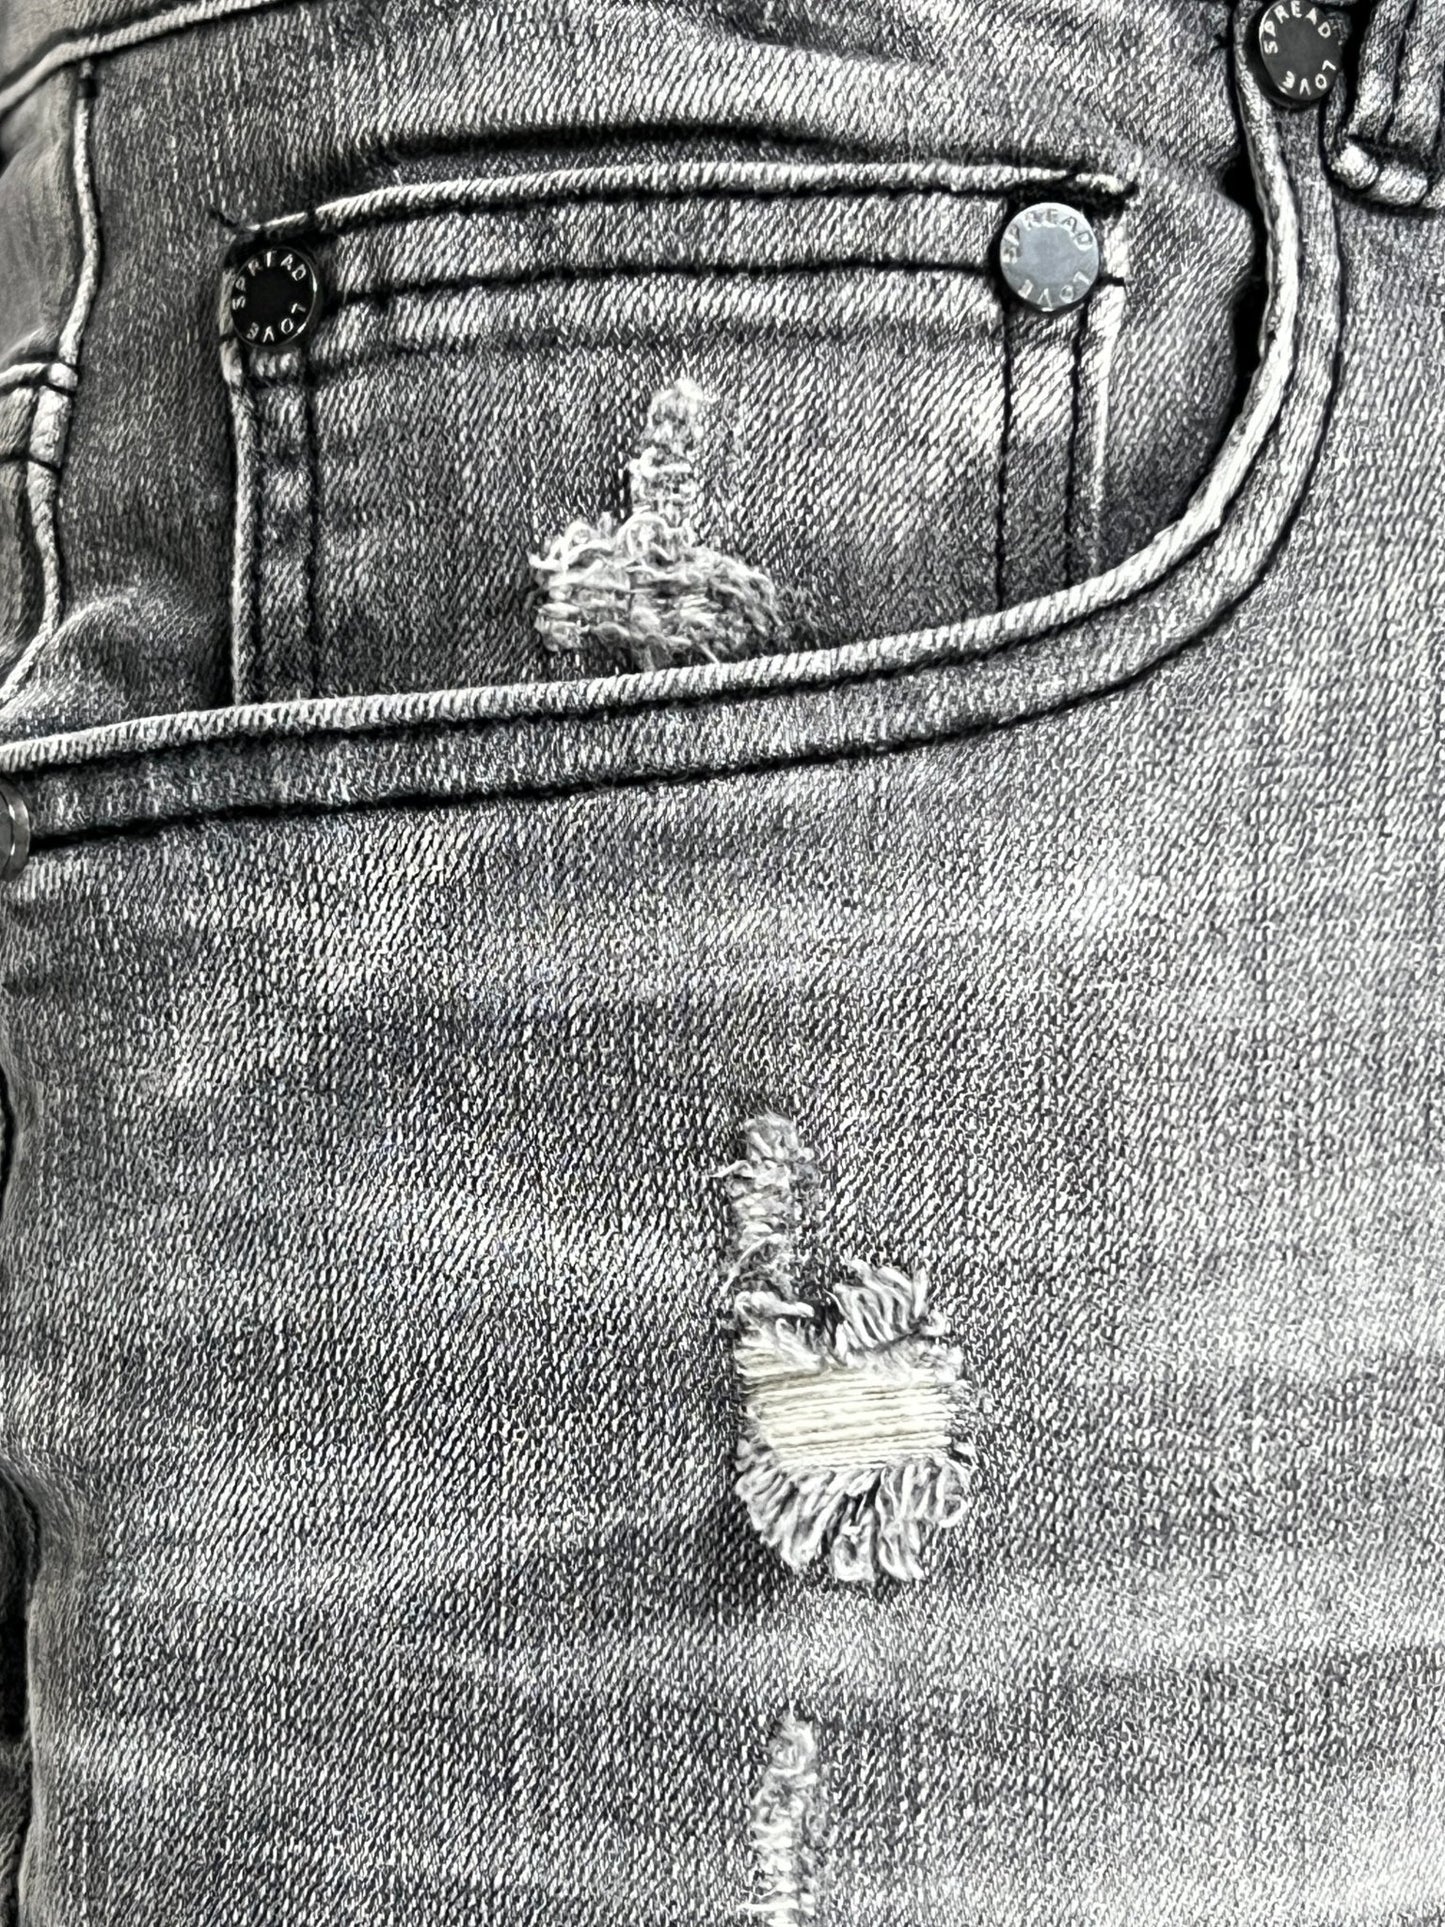 Close-up view of a faded SERENEDE TITAN JEANS GREY denim fabric with distressed details and riveted pockets.